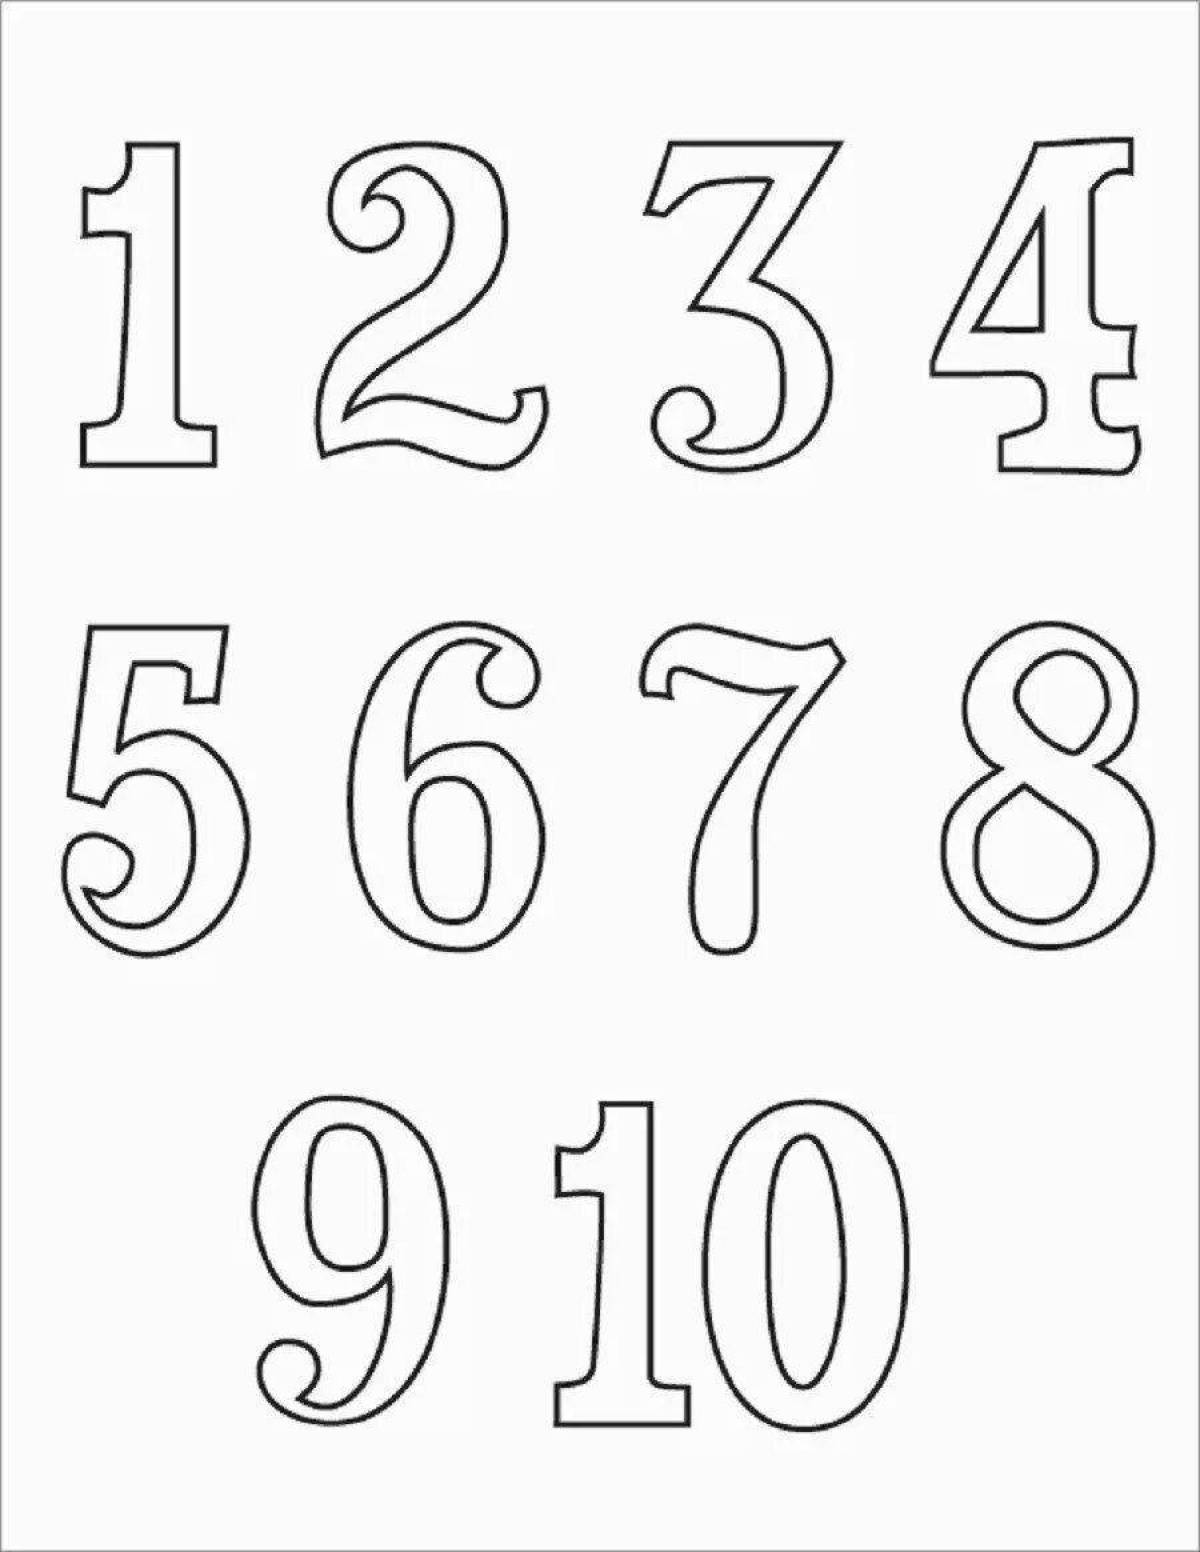 Coloring pages with page numbers